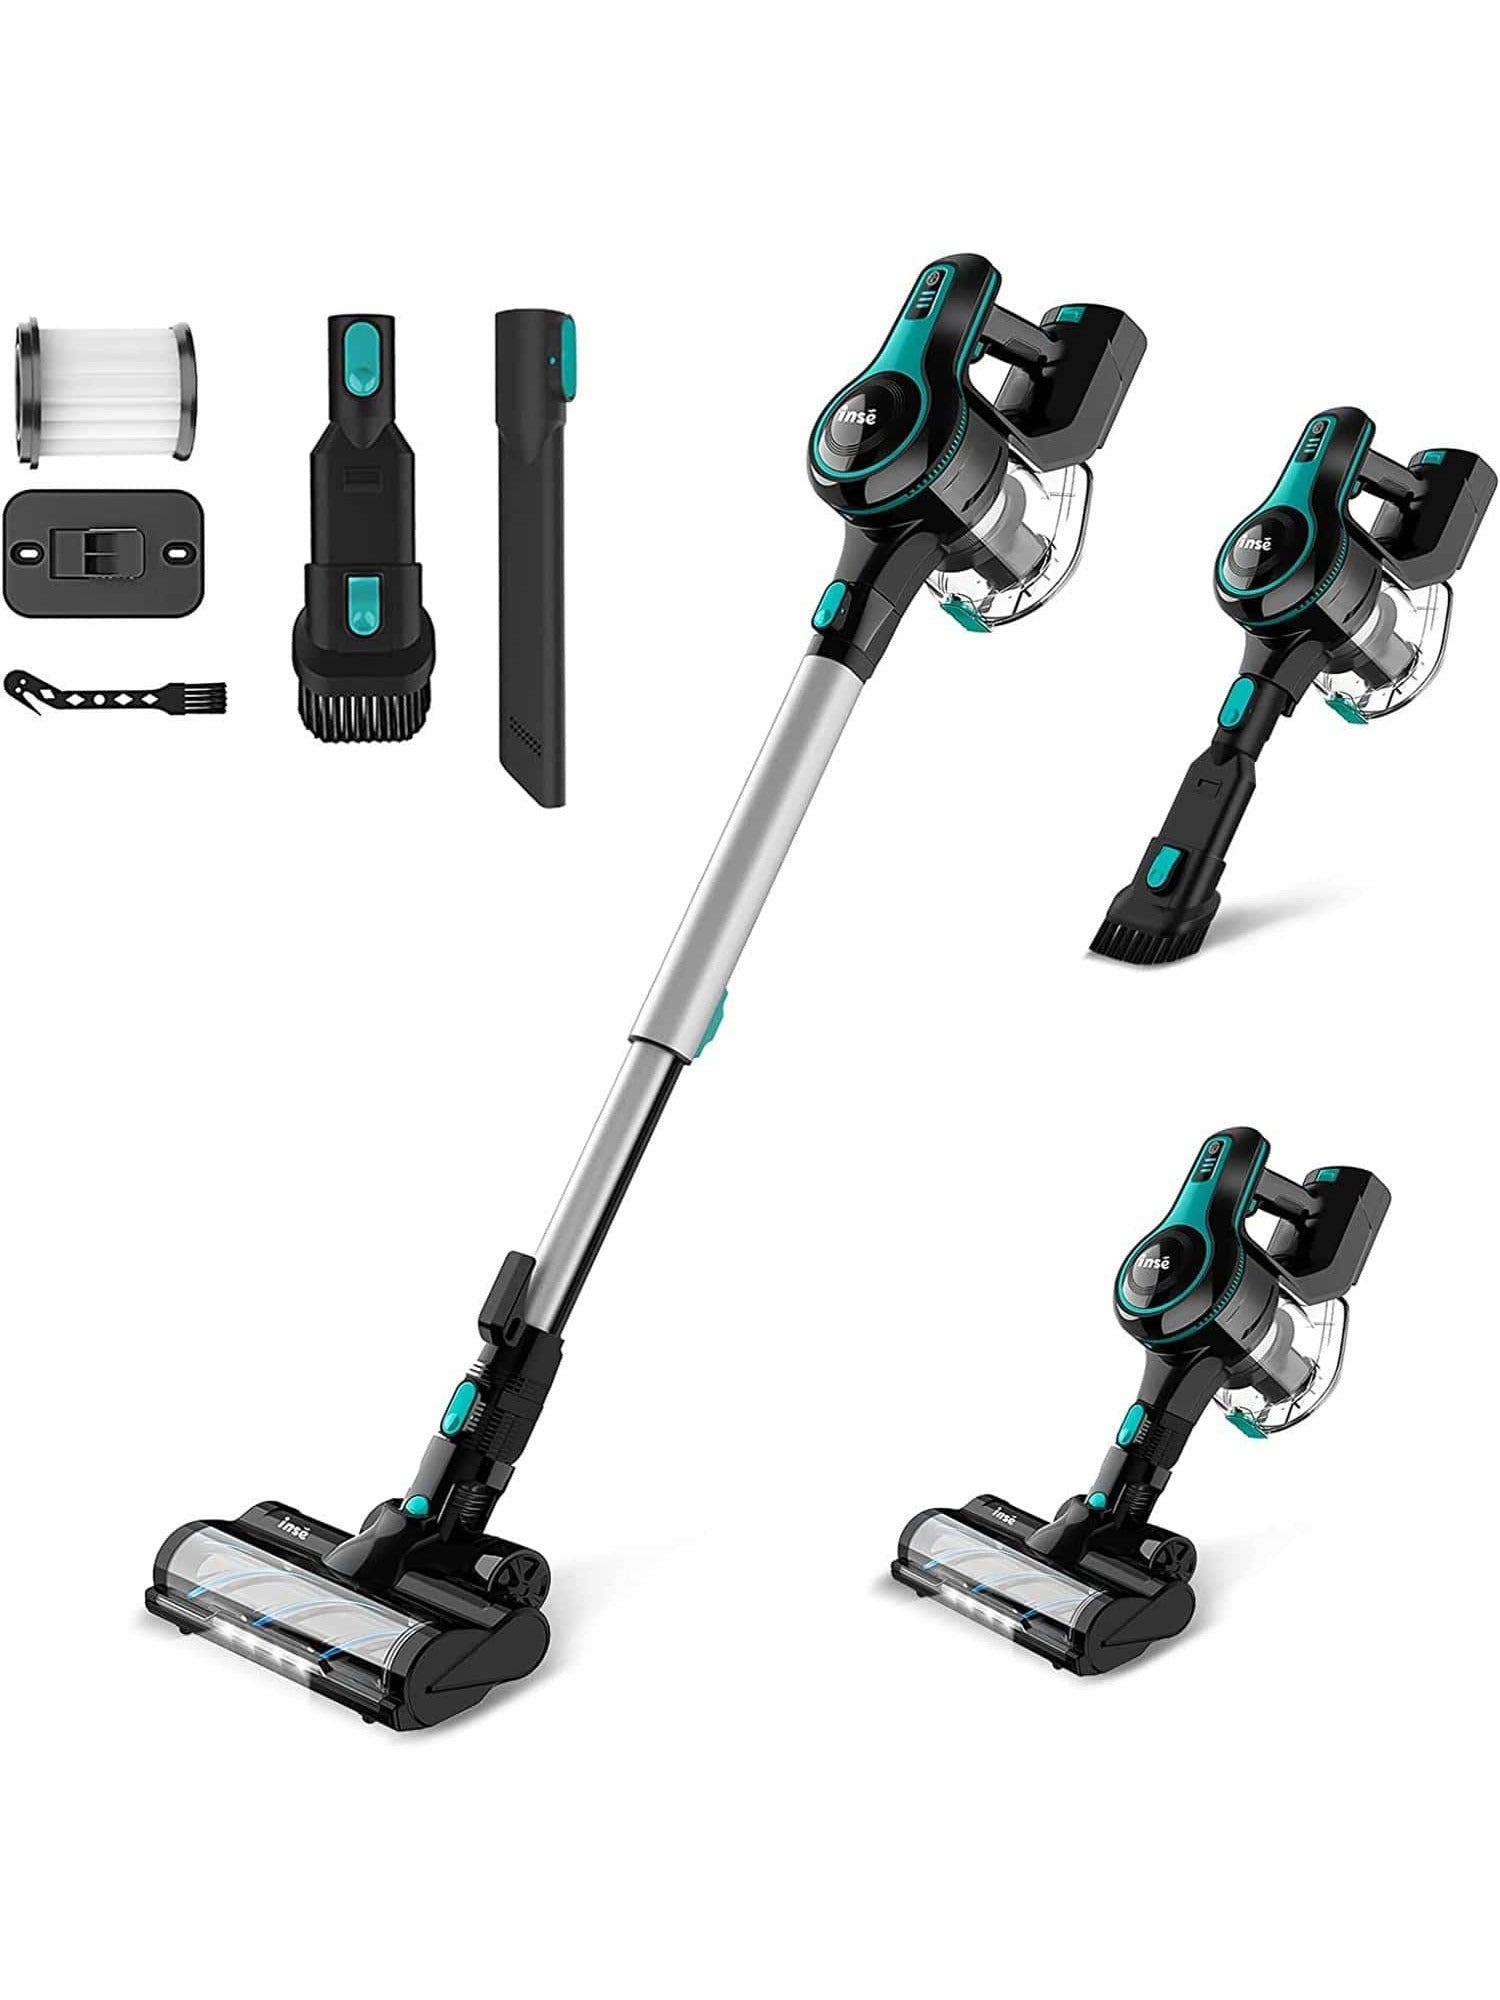 INSE Cordless Vacuum Cleaner, 6 in 1 Stick Vacuum with 25Kpa Powerful Suction, Rechargeable Vacuum with 2500m-Ah Battery, Up to 45mins Runtime Vacuum Cleaner for Pet Hair Carpet Hard Floor Home